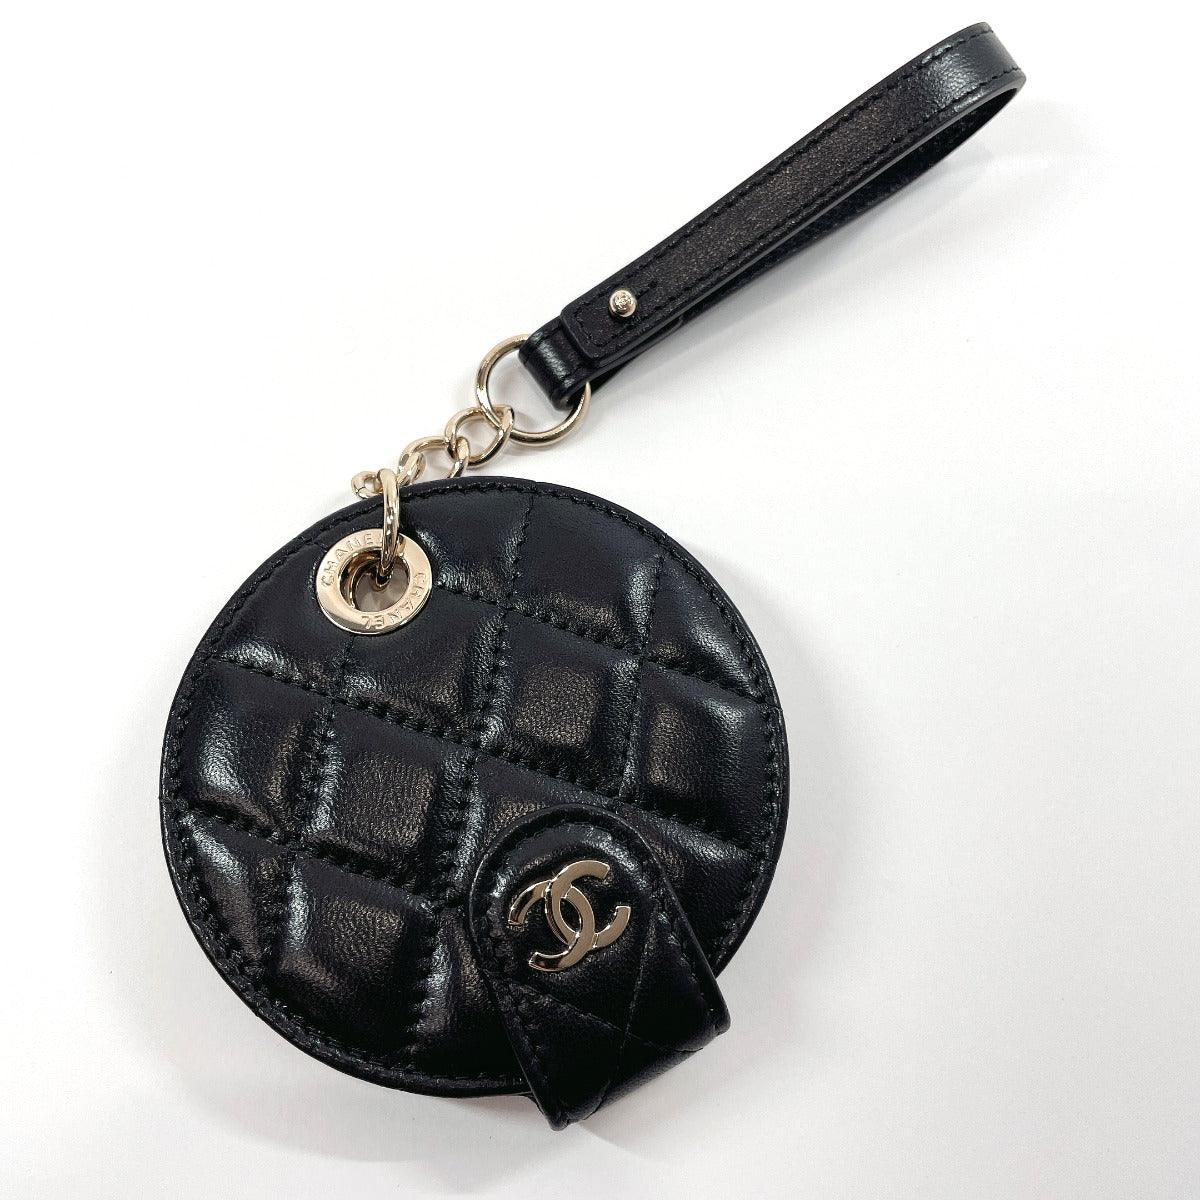 CHANEL Other accessories Matelasse name tag lambskin Black Women